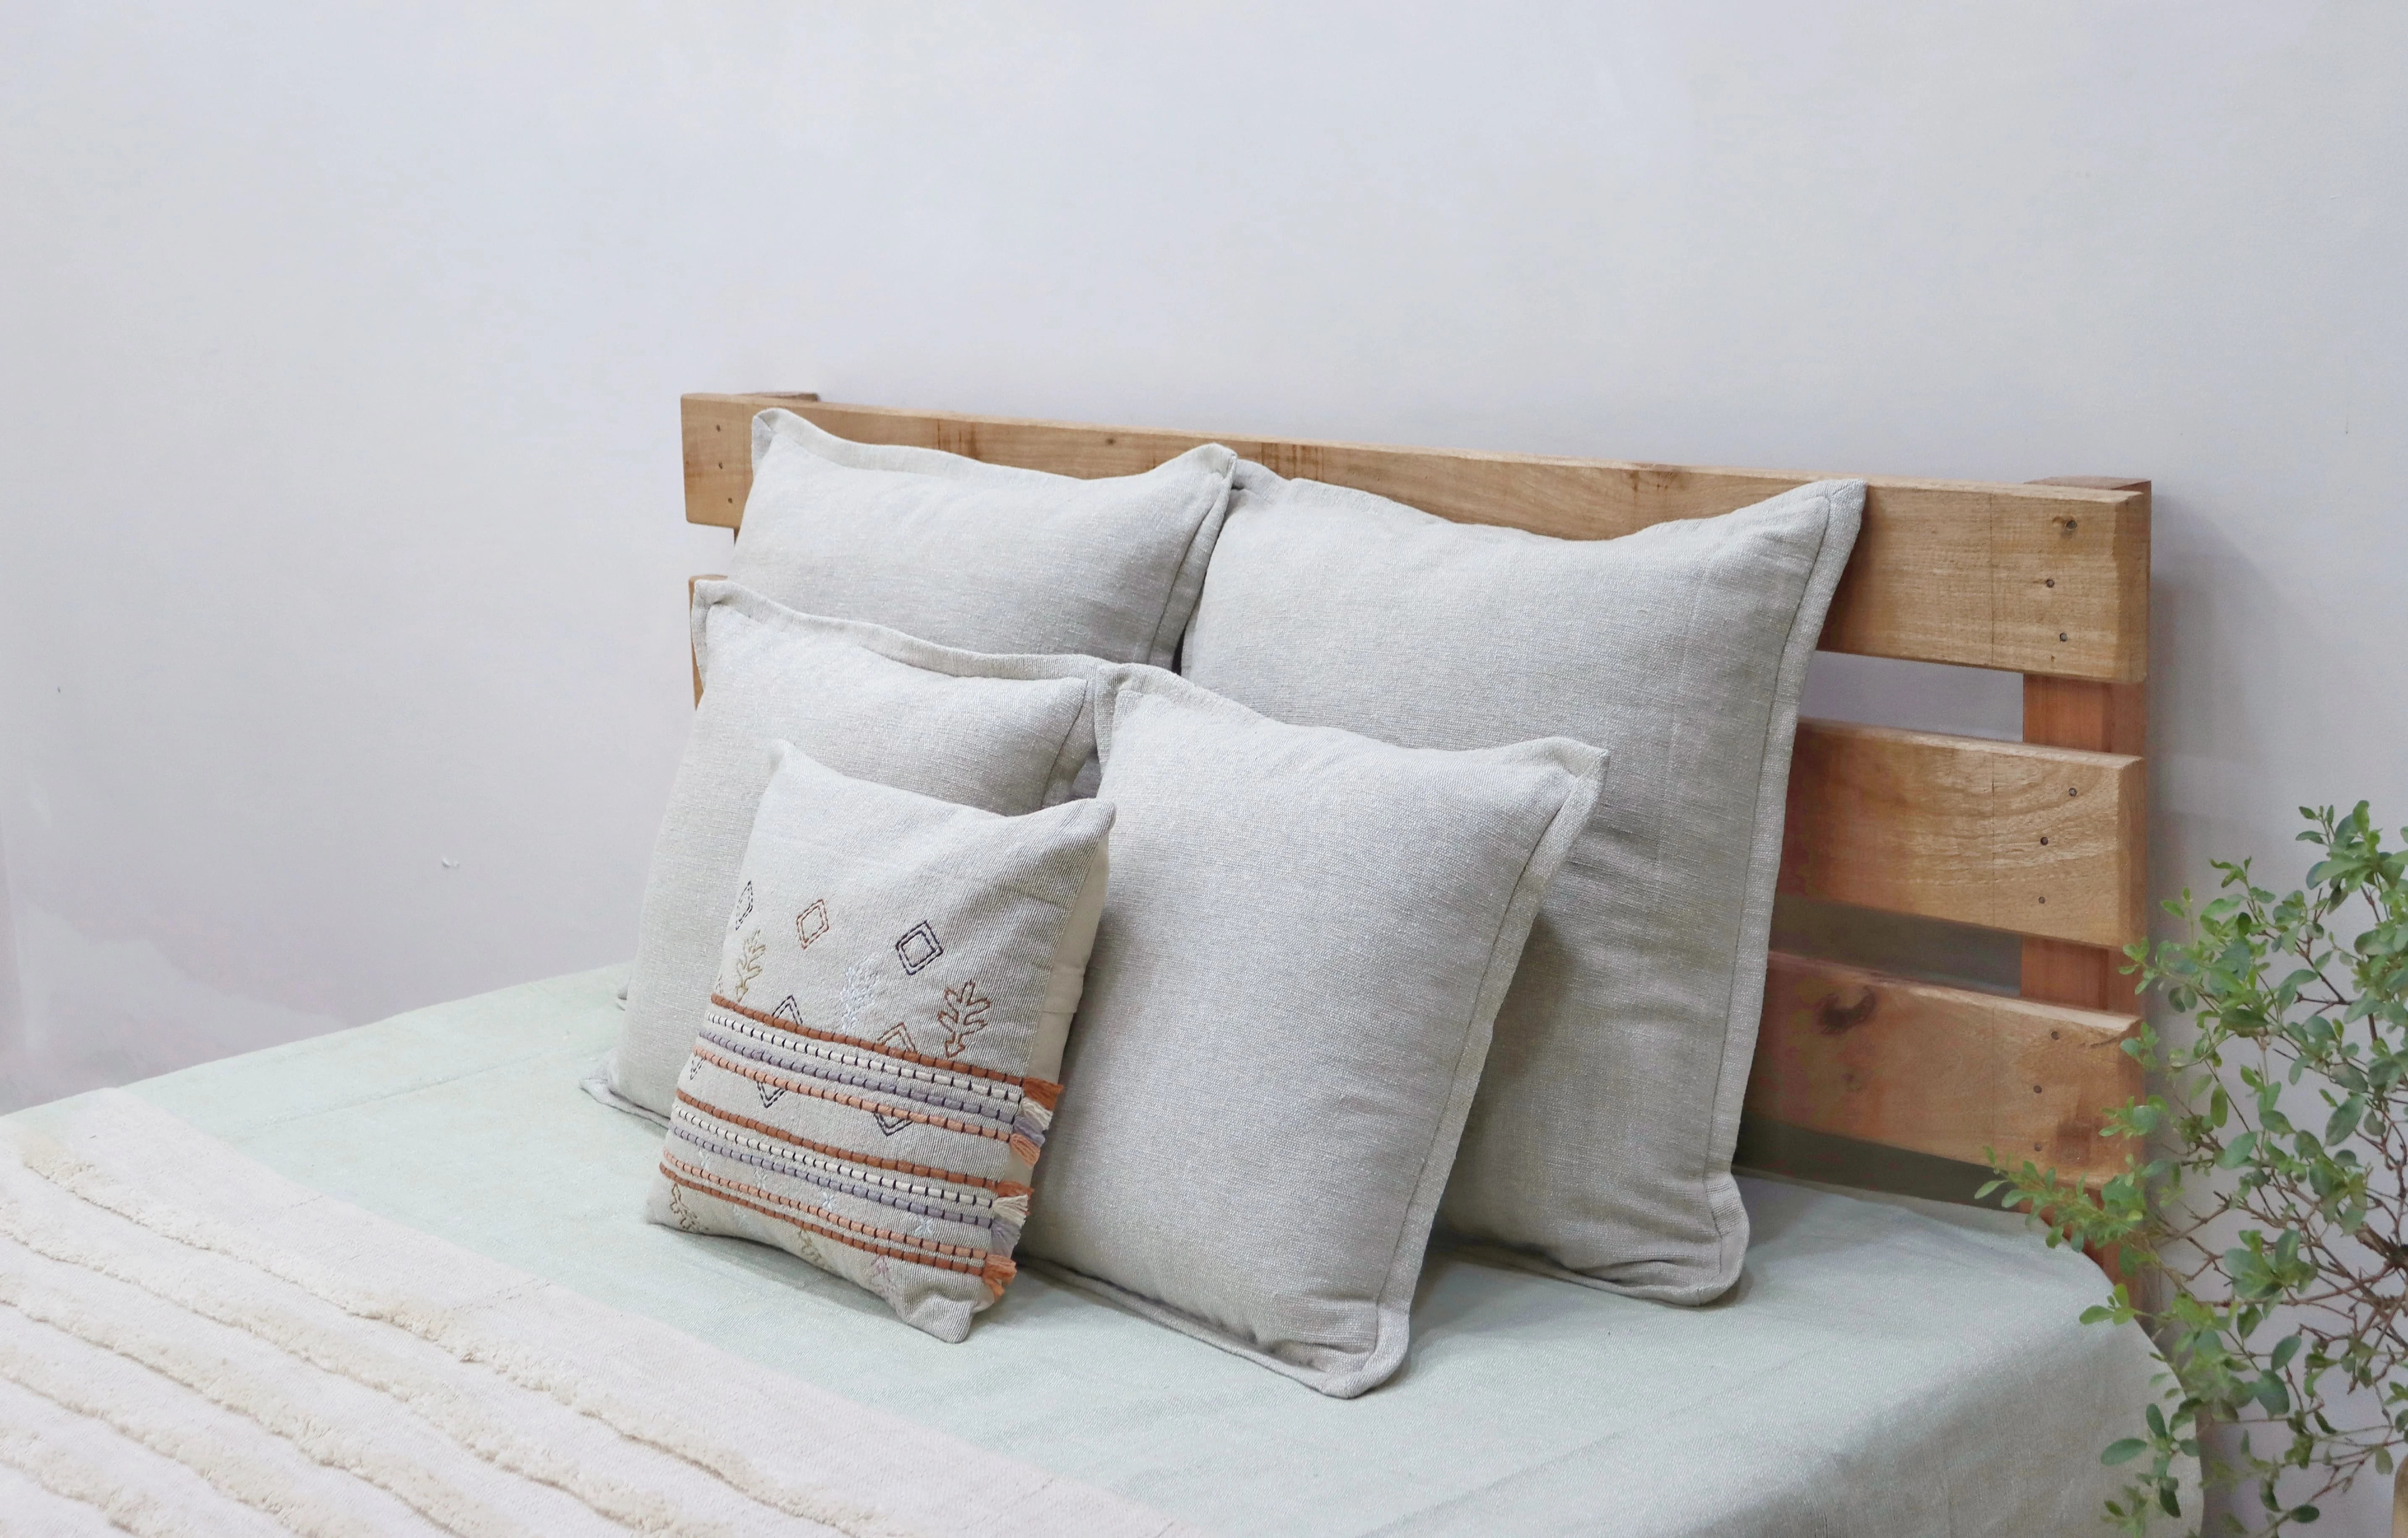 Set of 2 Natural Textured Cotton Cushion Cover